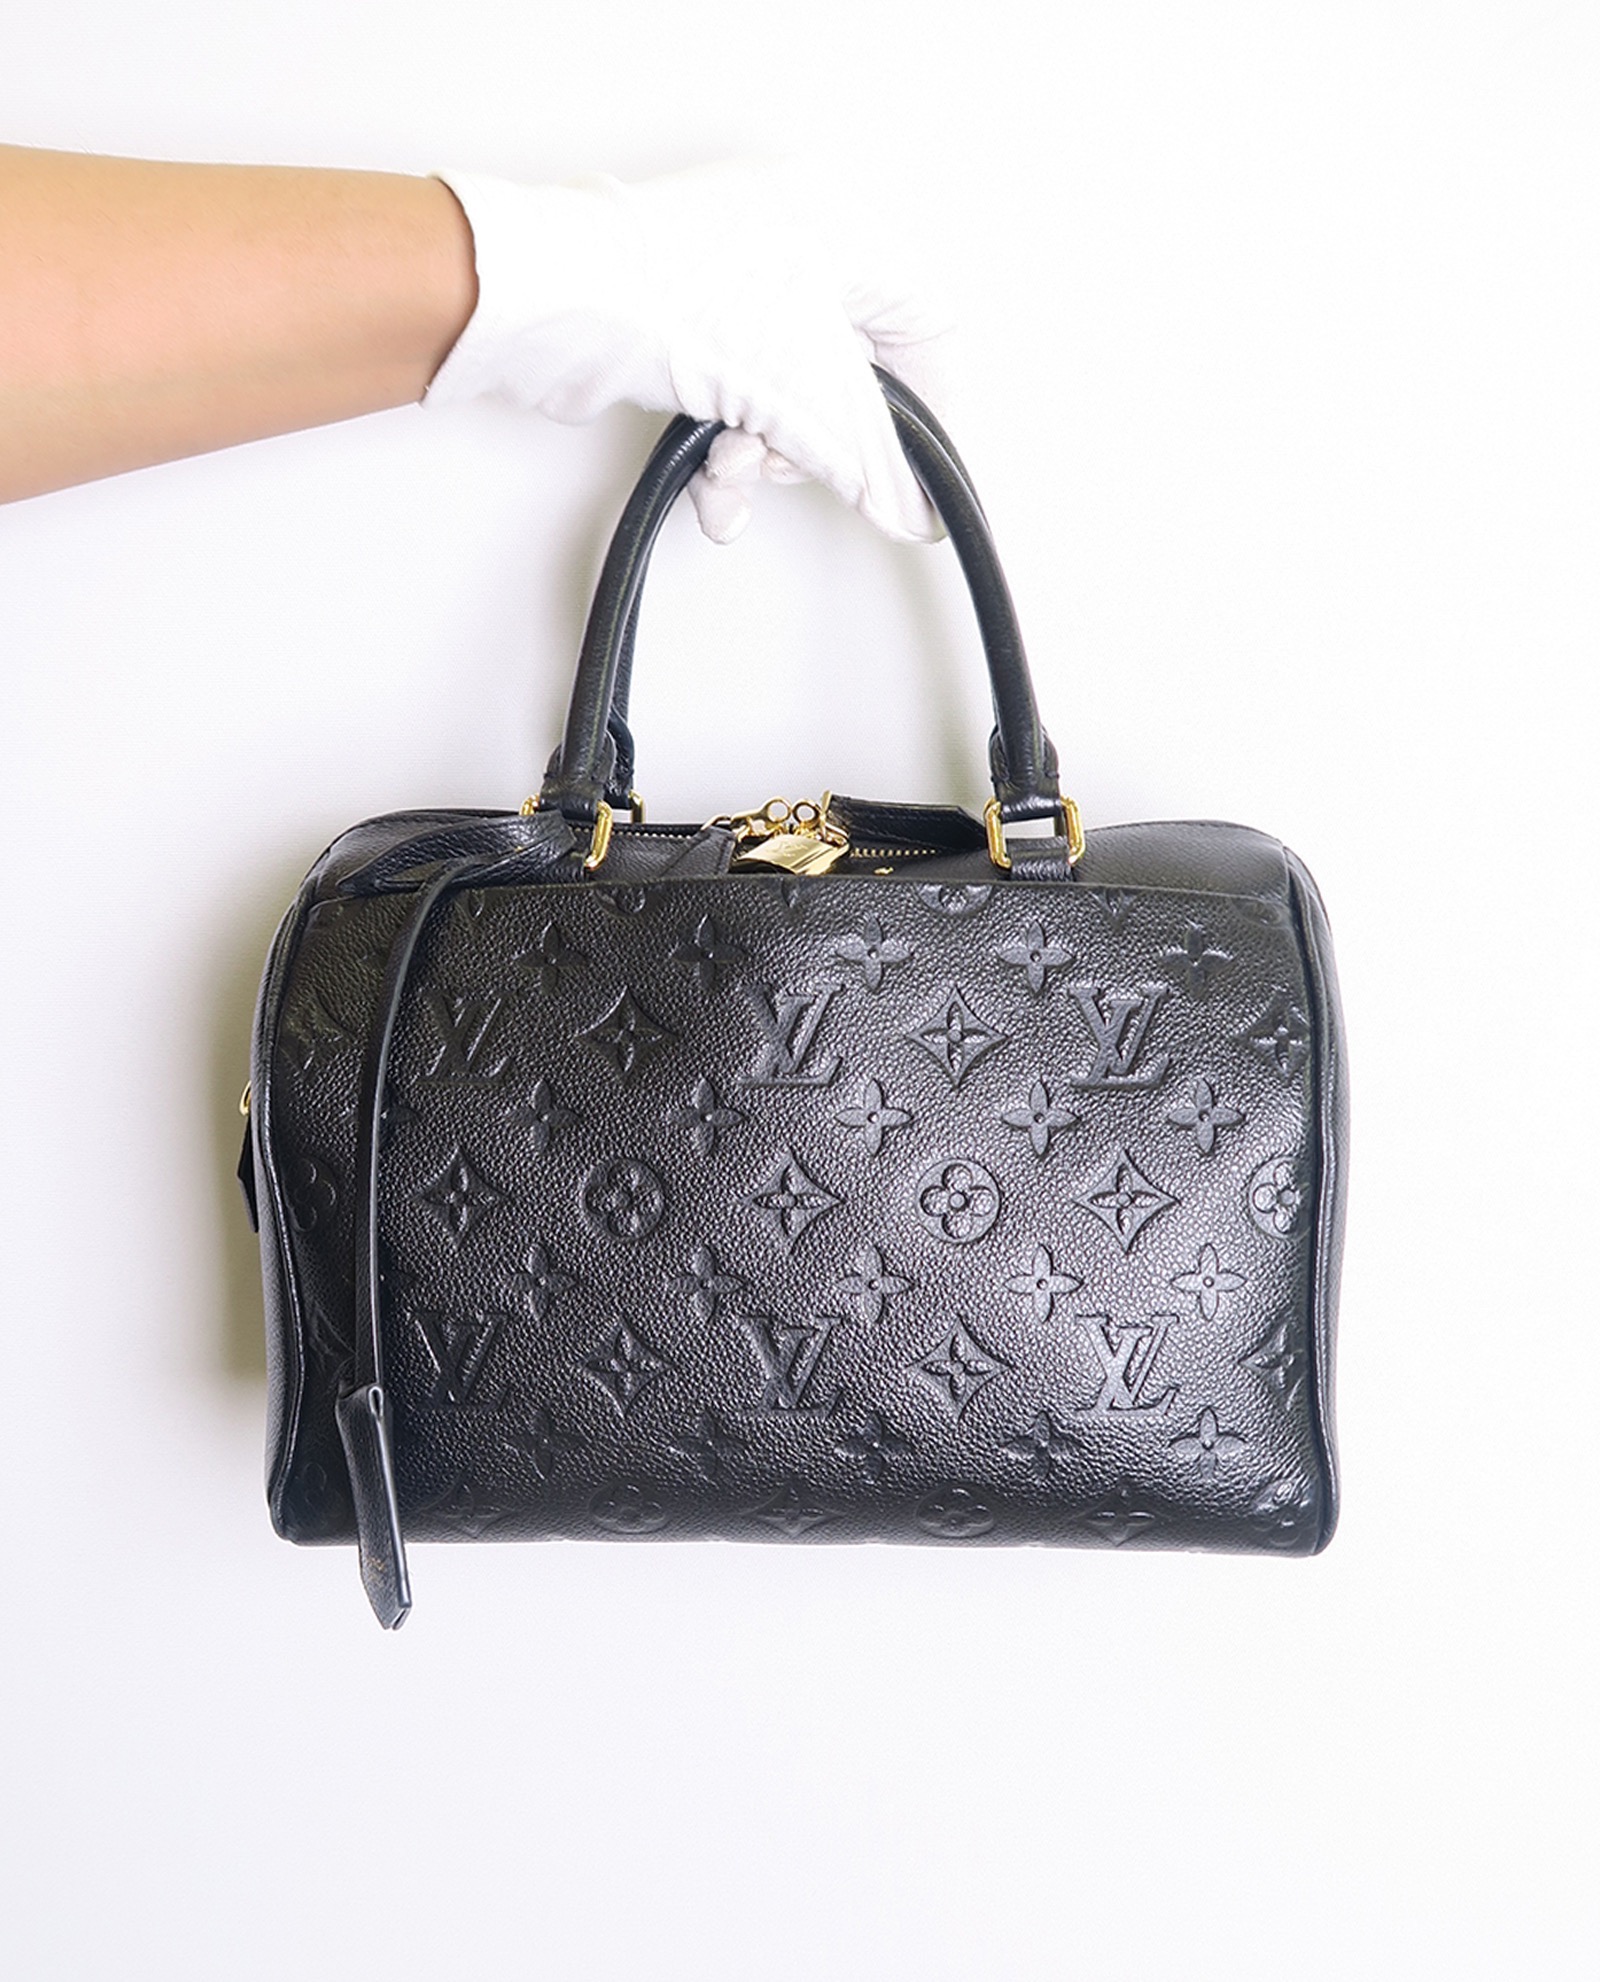 Designer Exchange Ltd - Need some extra cash in time for Christmas? 🎅 Sell  your Louis Vuitton Speedy Bandouliere to us 👜 We are looking for them in  any size, leather and